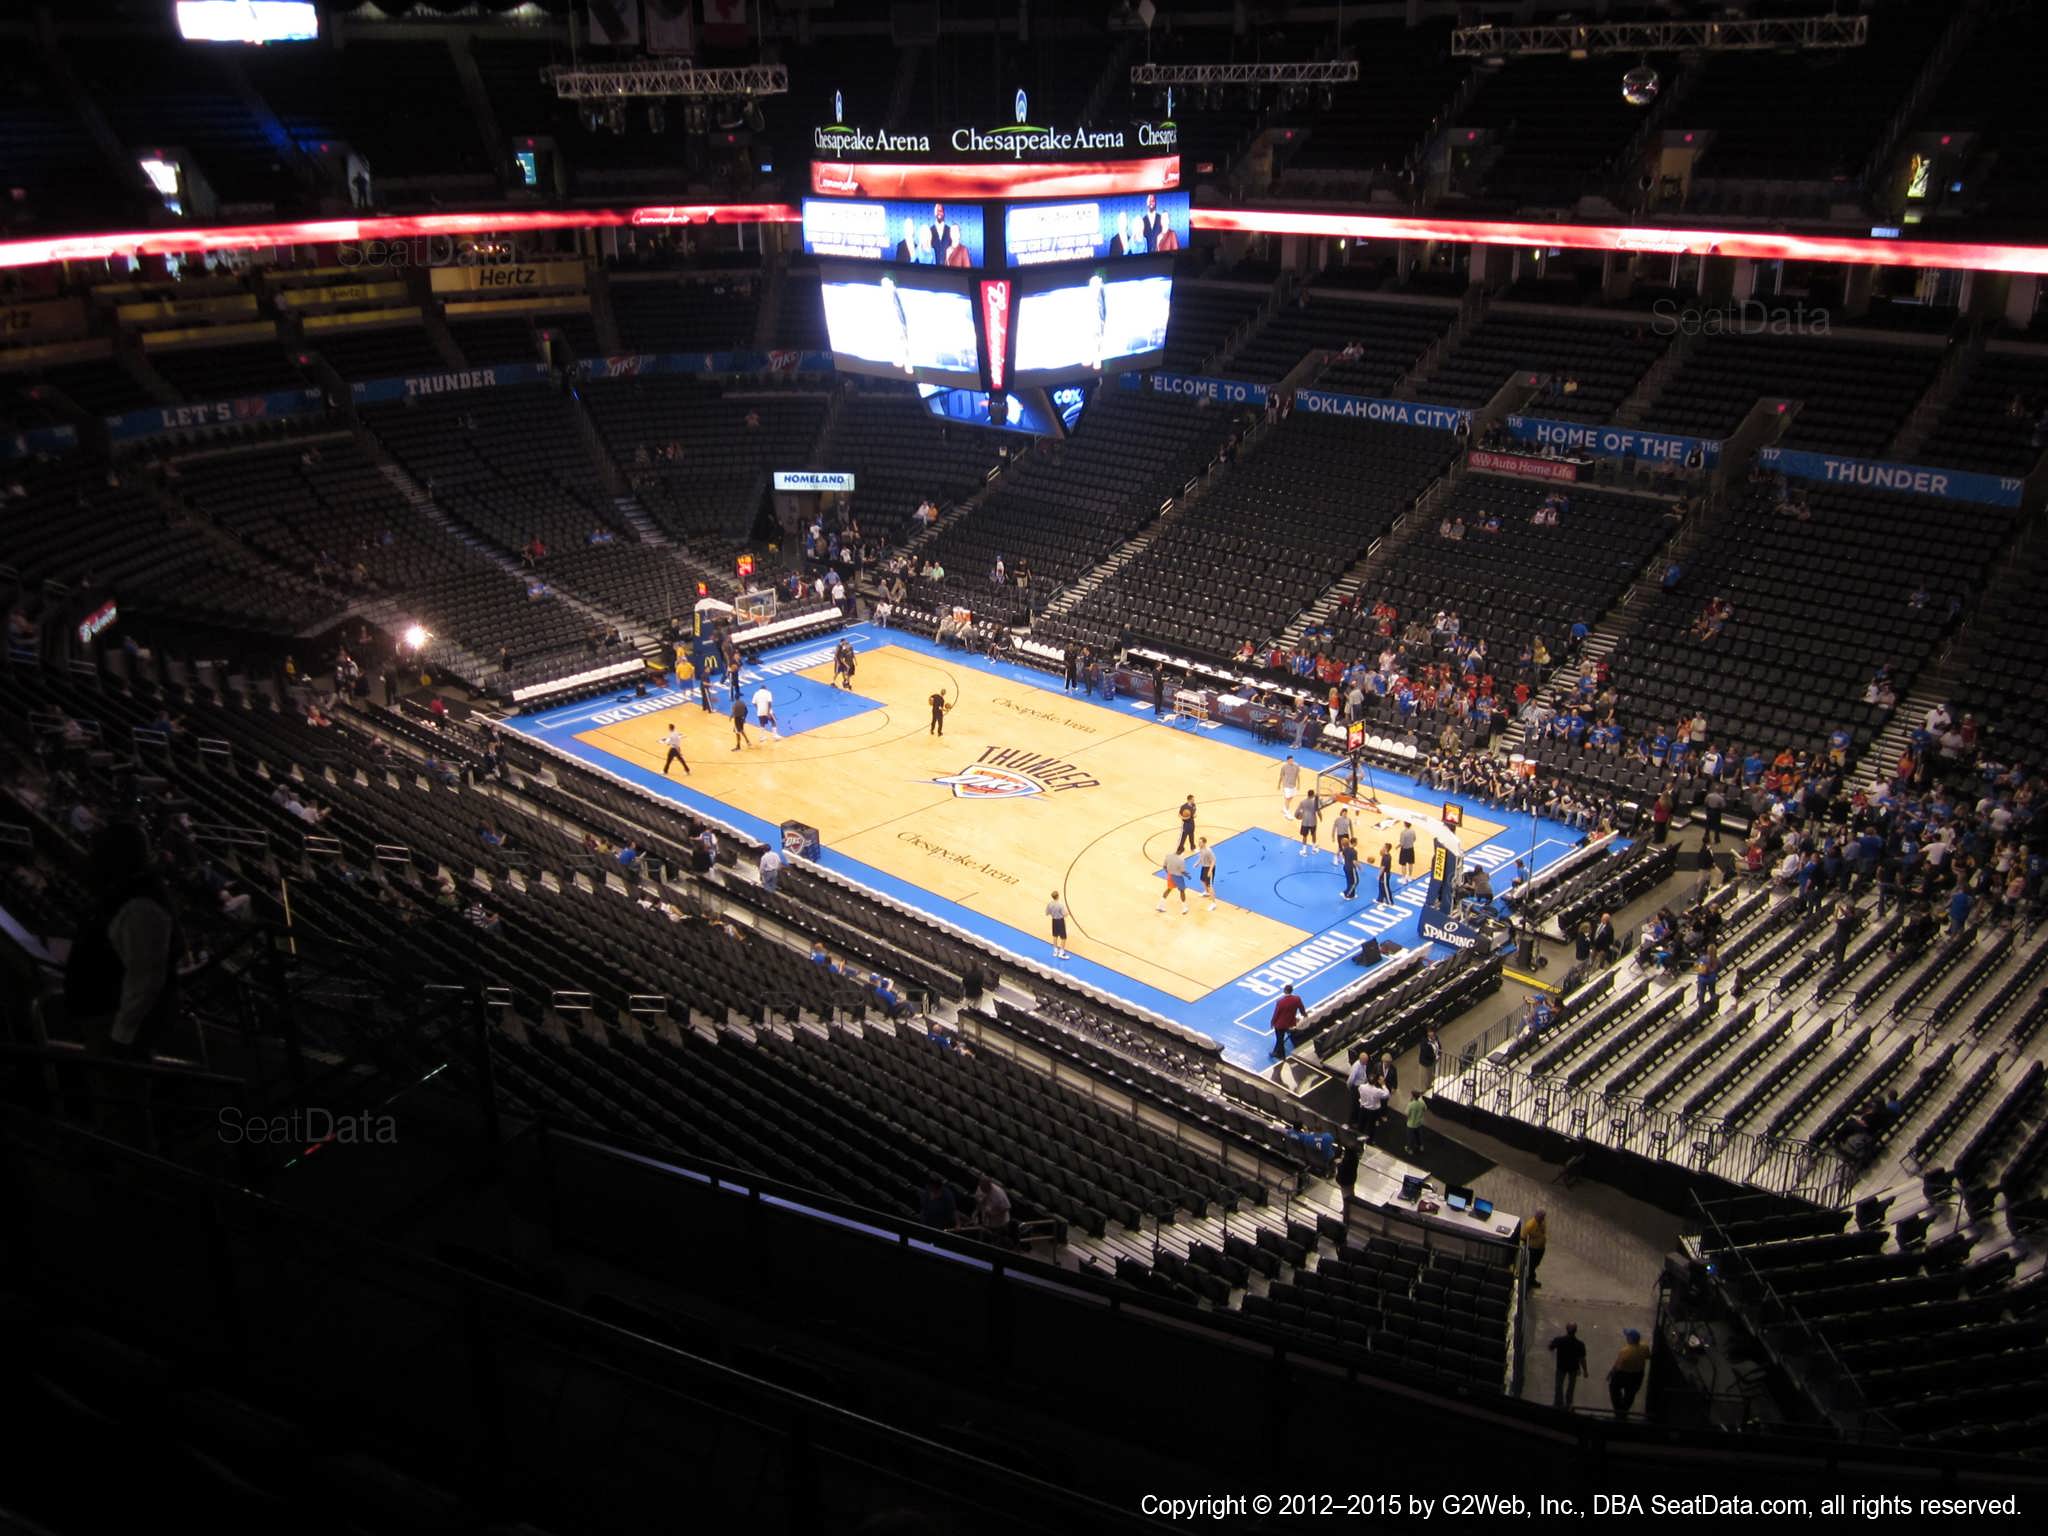 Seat view from section 305 at Chesapeake Energy Arena, home of the Oklahoma City Thunder